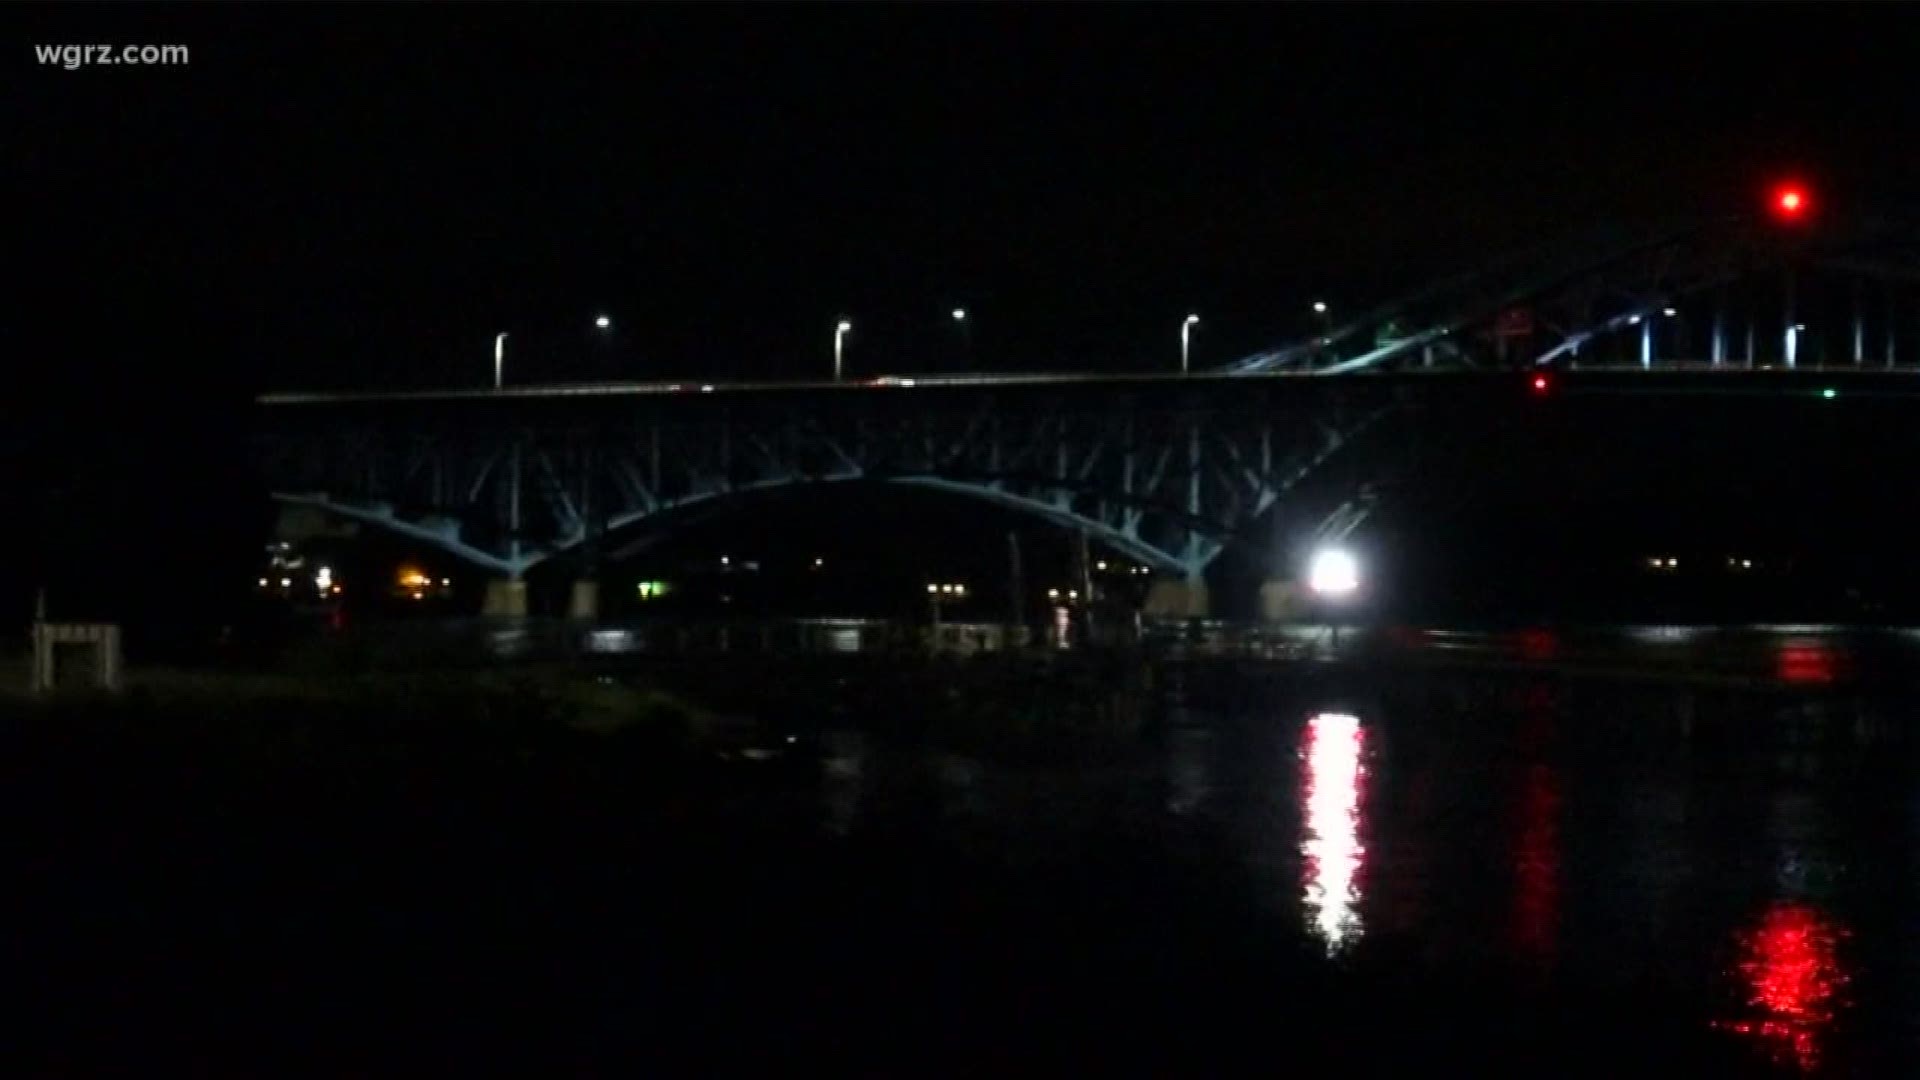 The Thruway Authority says the northbound South Grand Island Bridge will be closed Sunday from midnight until 1 p.m. to accommodate the cast and crew.